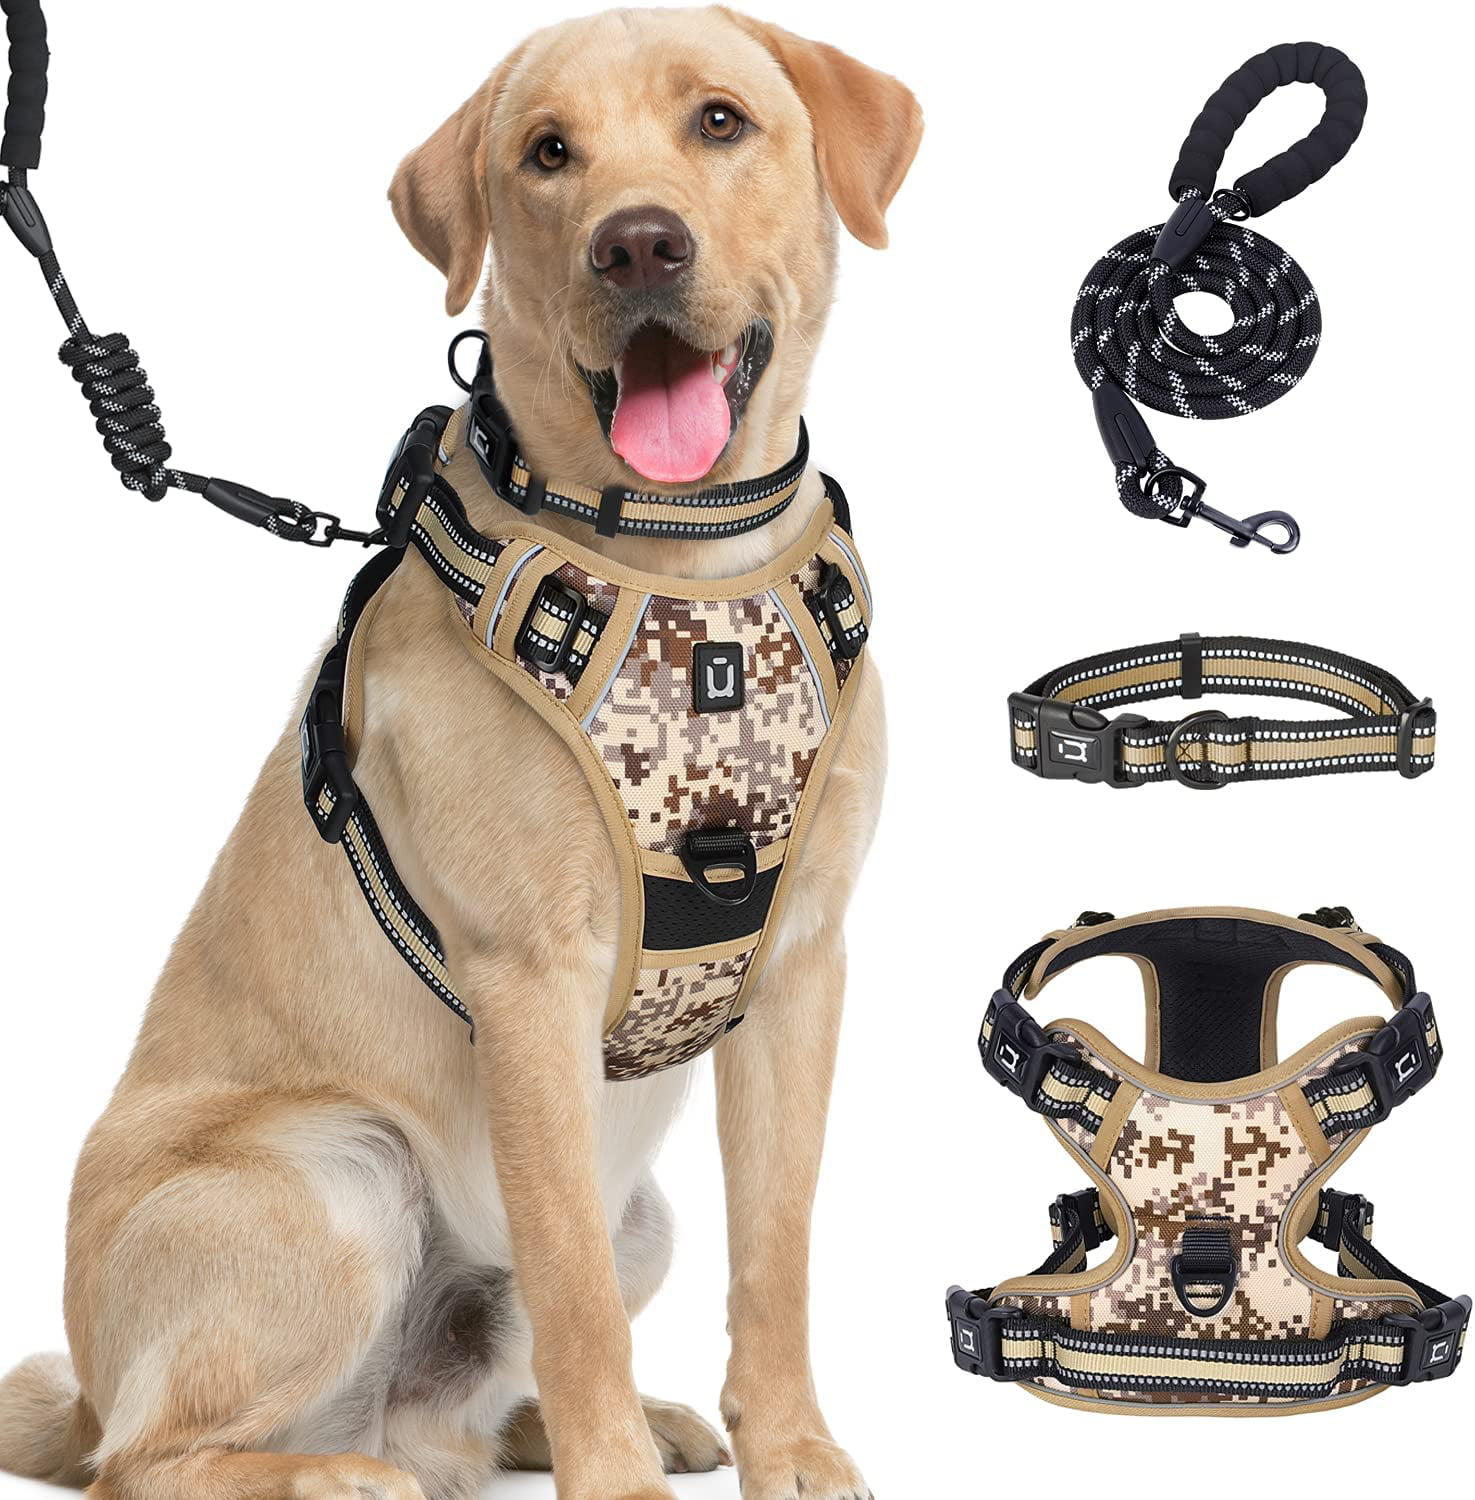 Dog Harness Waldseemuller Dog Harness for Medium Dogs No Pull，Small Dog Harness Easy Walking Dog Vest with Handle，Reflective Oxford Soft Vest 4 Buckles Dog Harness for Large Dogs Easy ON and Off 